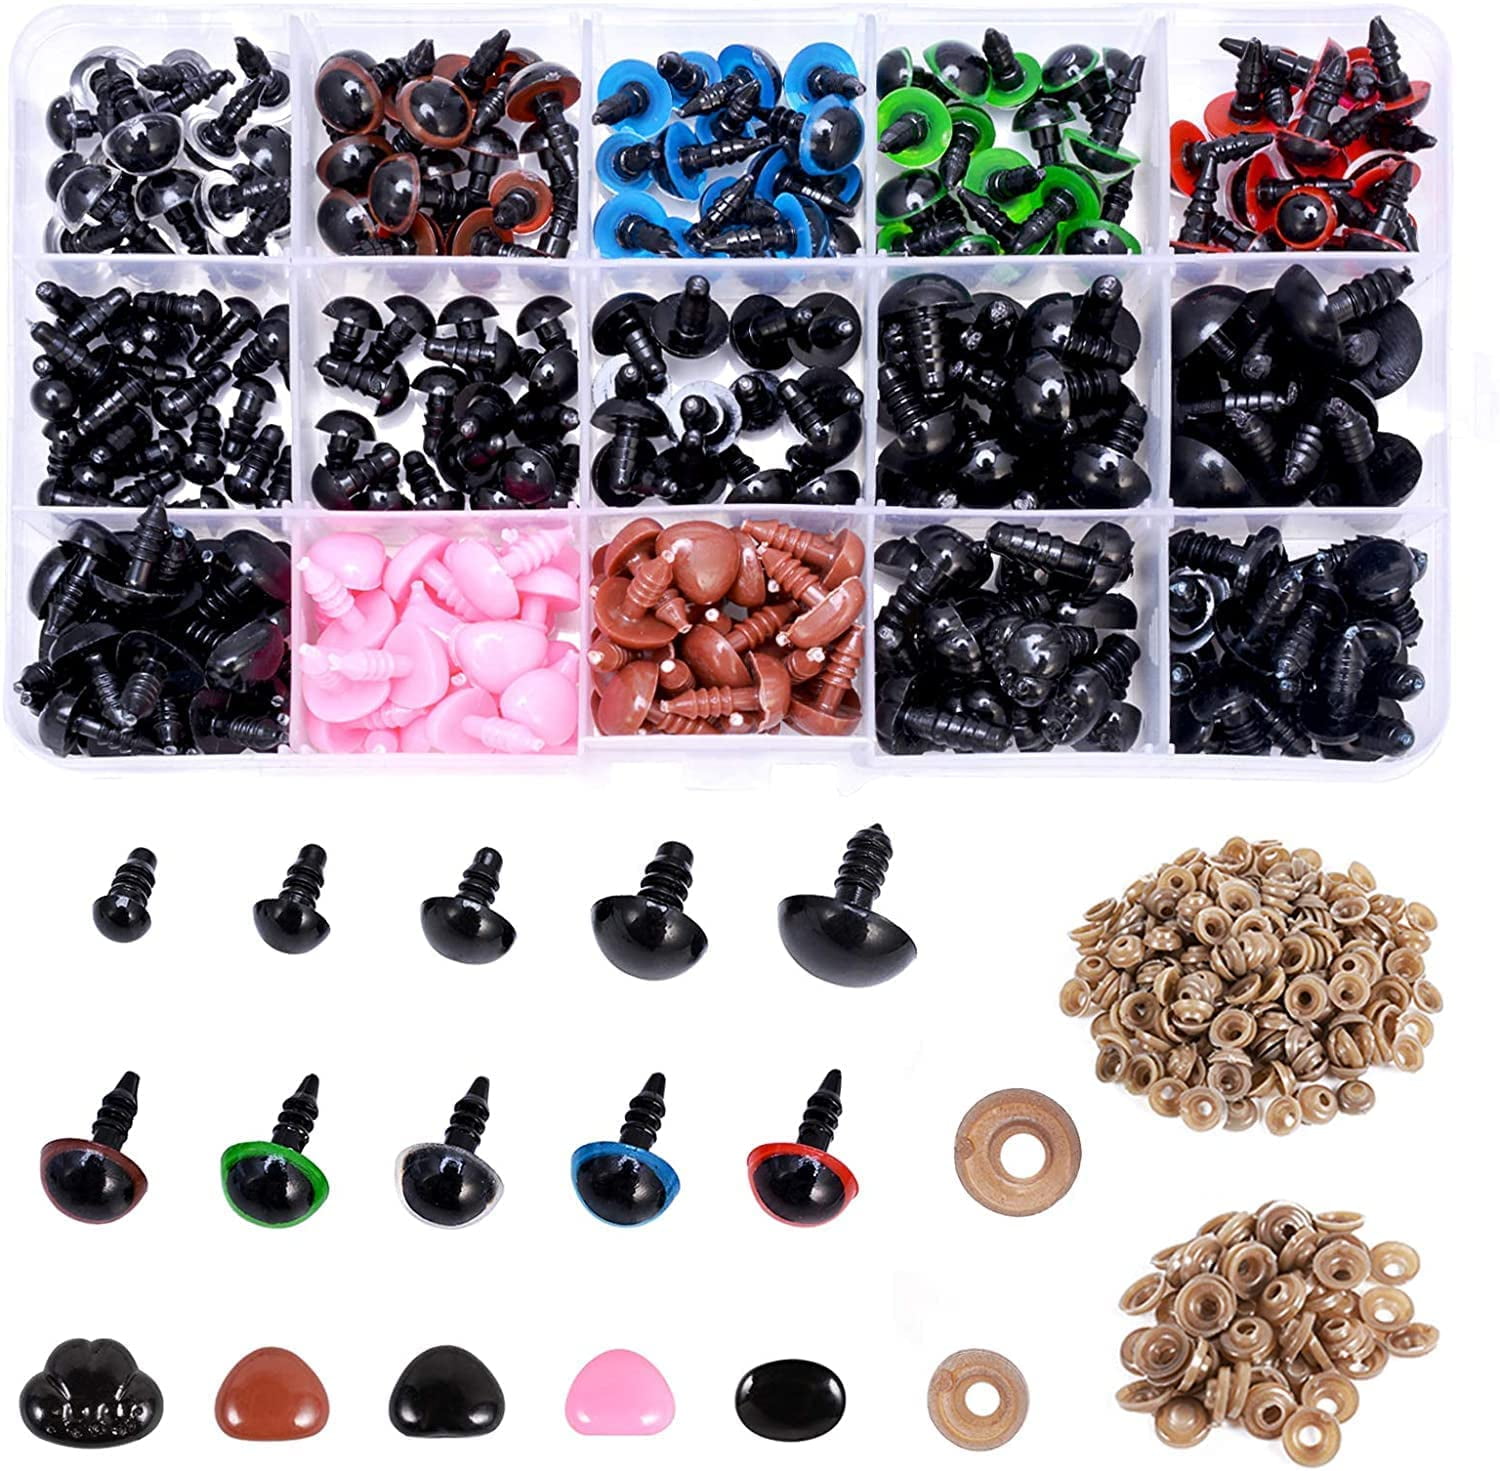 Willstar 150pcs Black Plastic Safety Eyes with Washers 6mm 8mm 9mm 10mm 12mm Craft Doll Eyes for Amigurumis Crochet and Stuffed Animals Bears Making